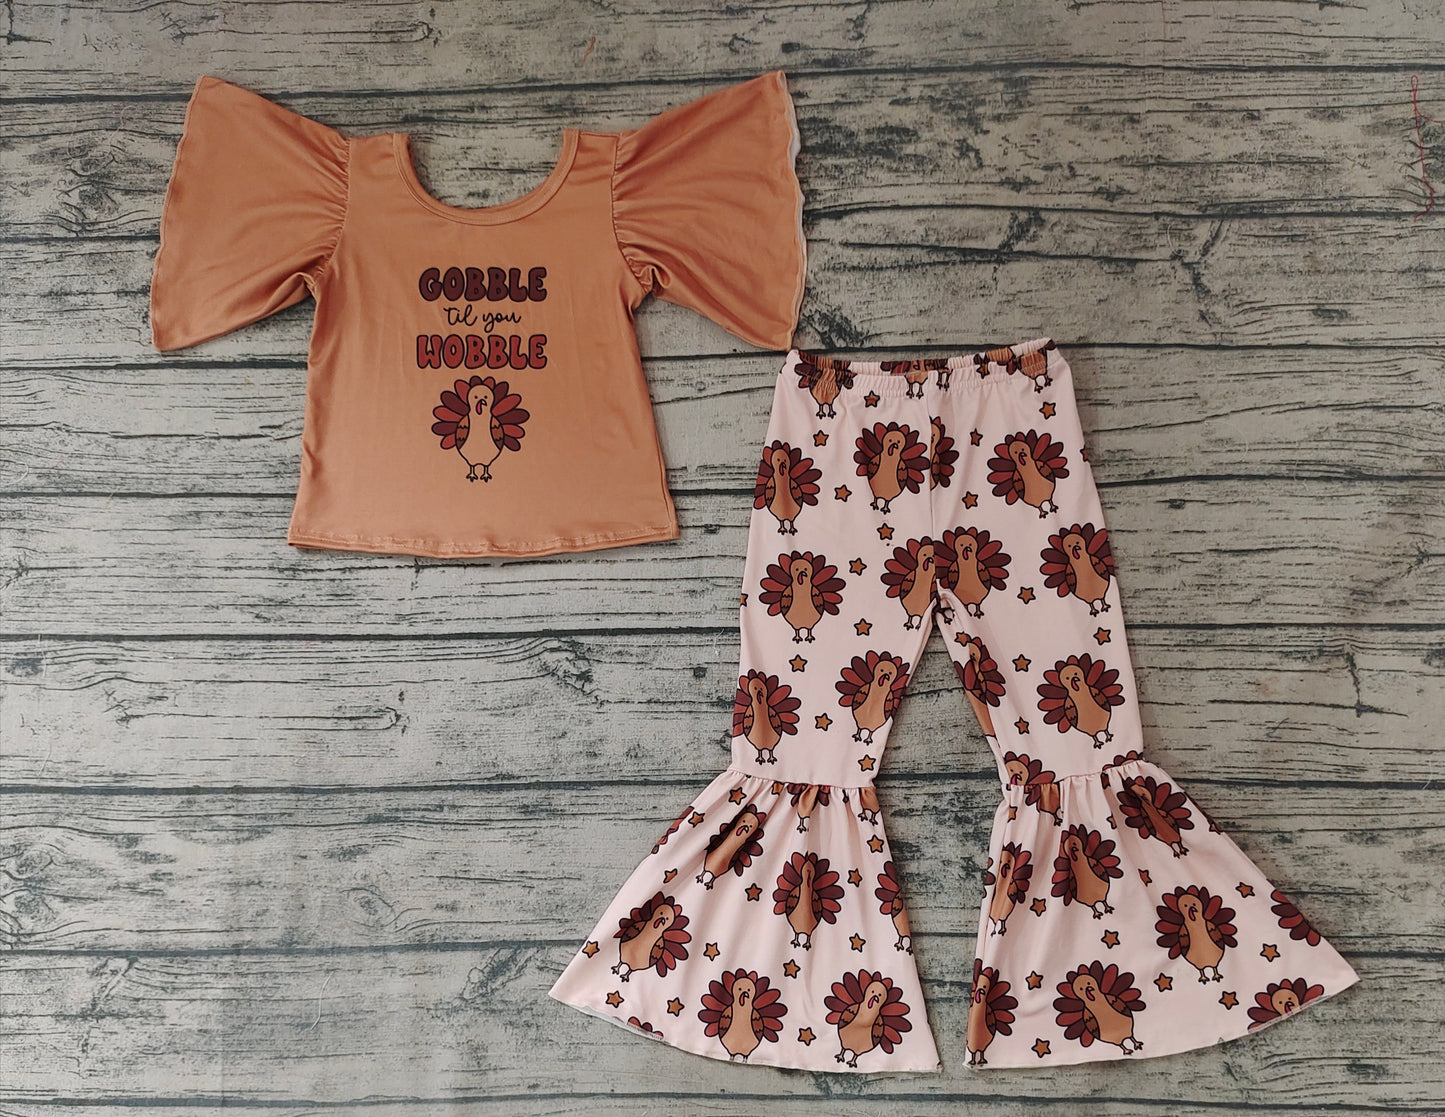 Baby Girls Gobble Turkey Thanksgiving Bell Pants Clothes Sets